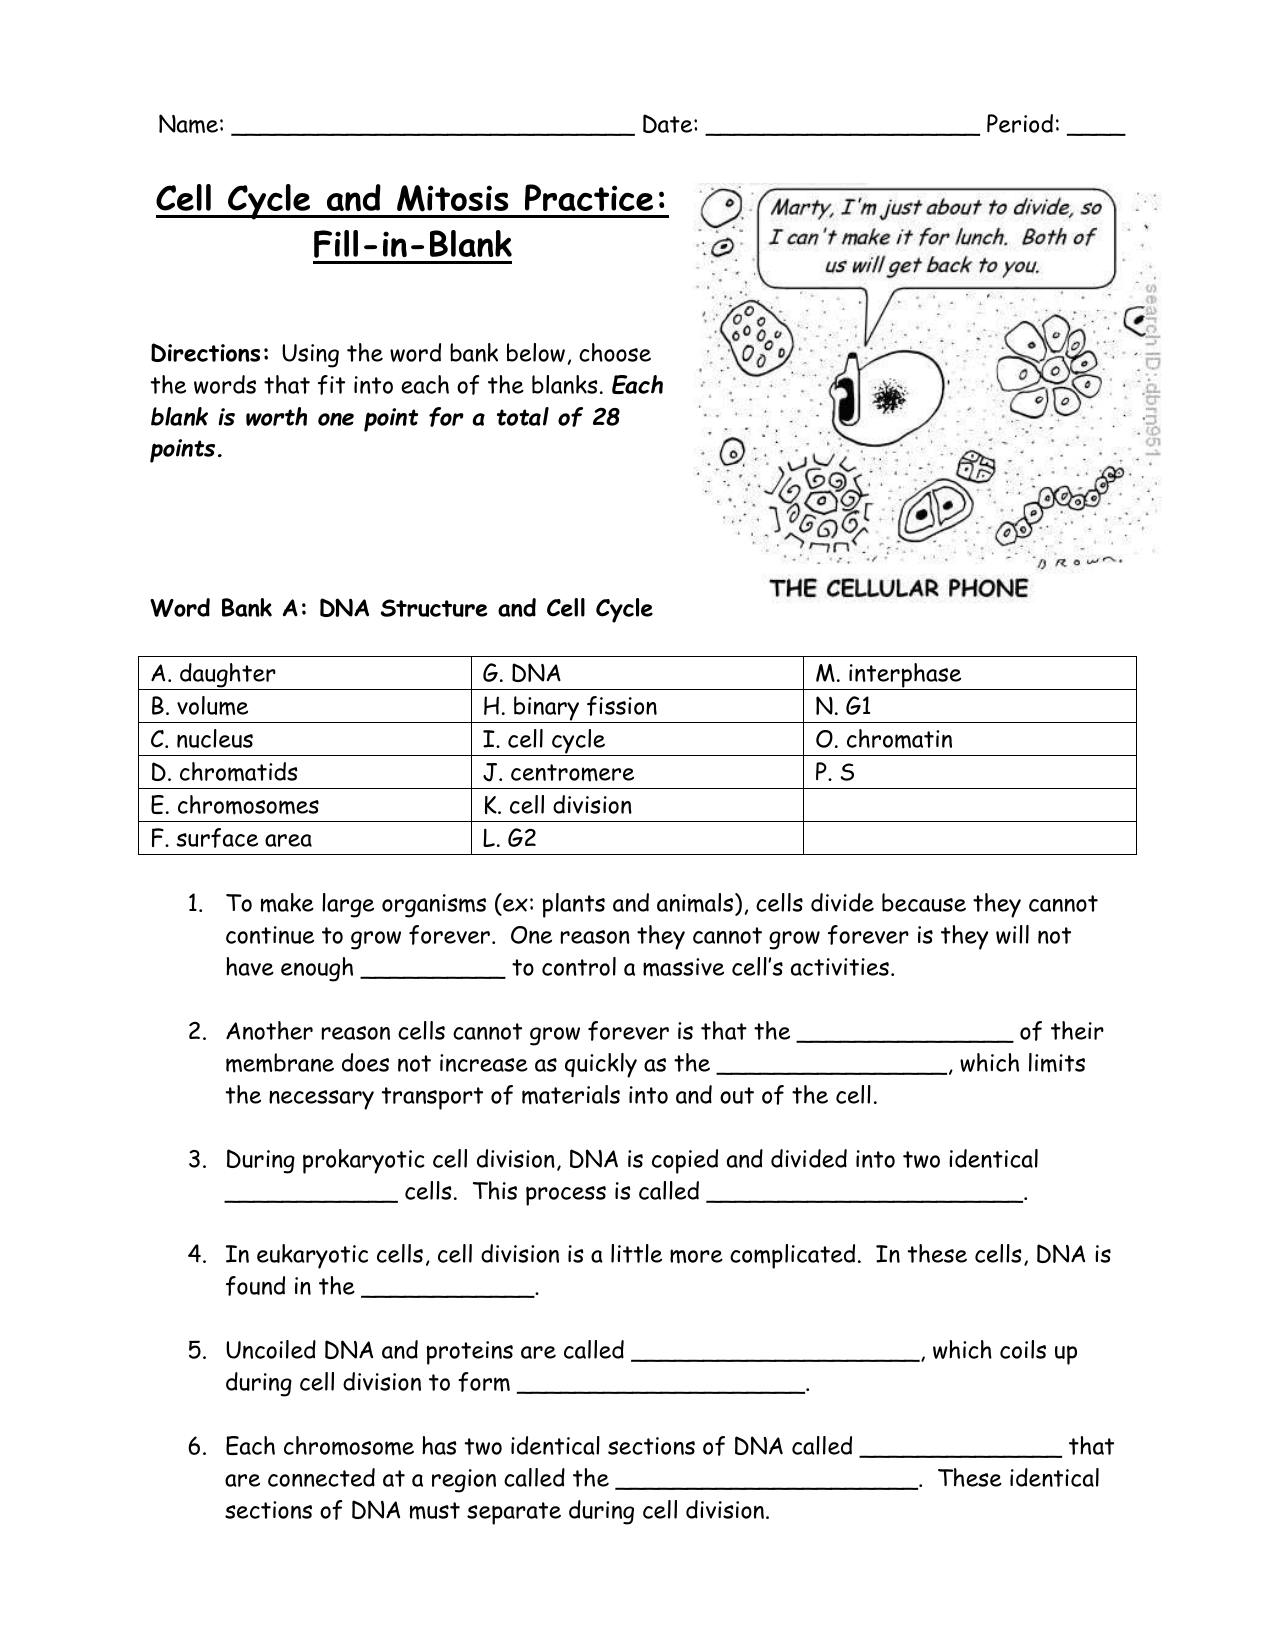 Mitosis Fill-in-the-Blank Worksheet Throughout The Cell Cycle Worksheet Answers